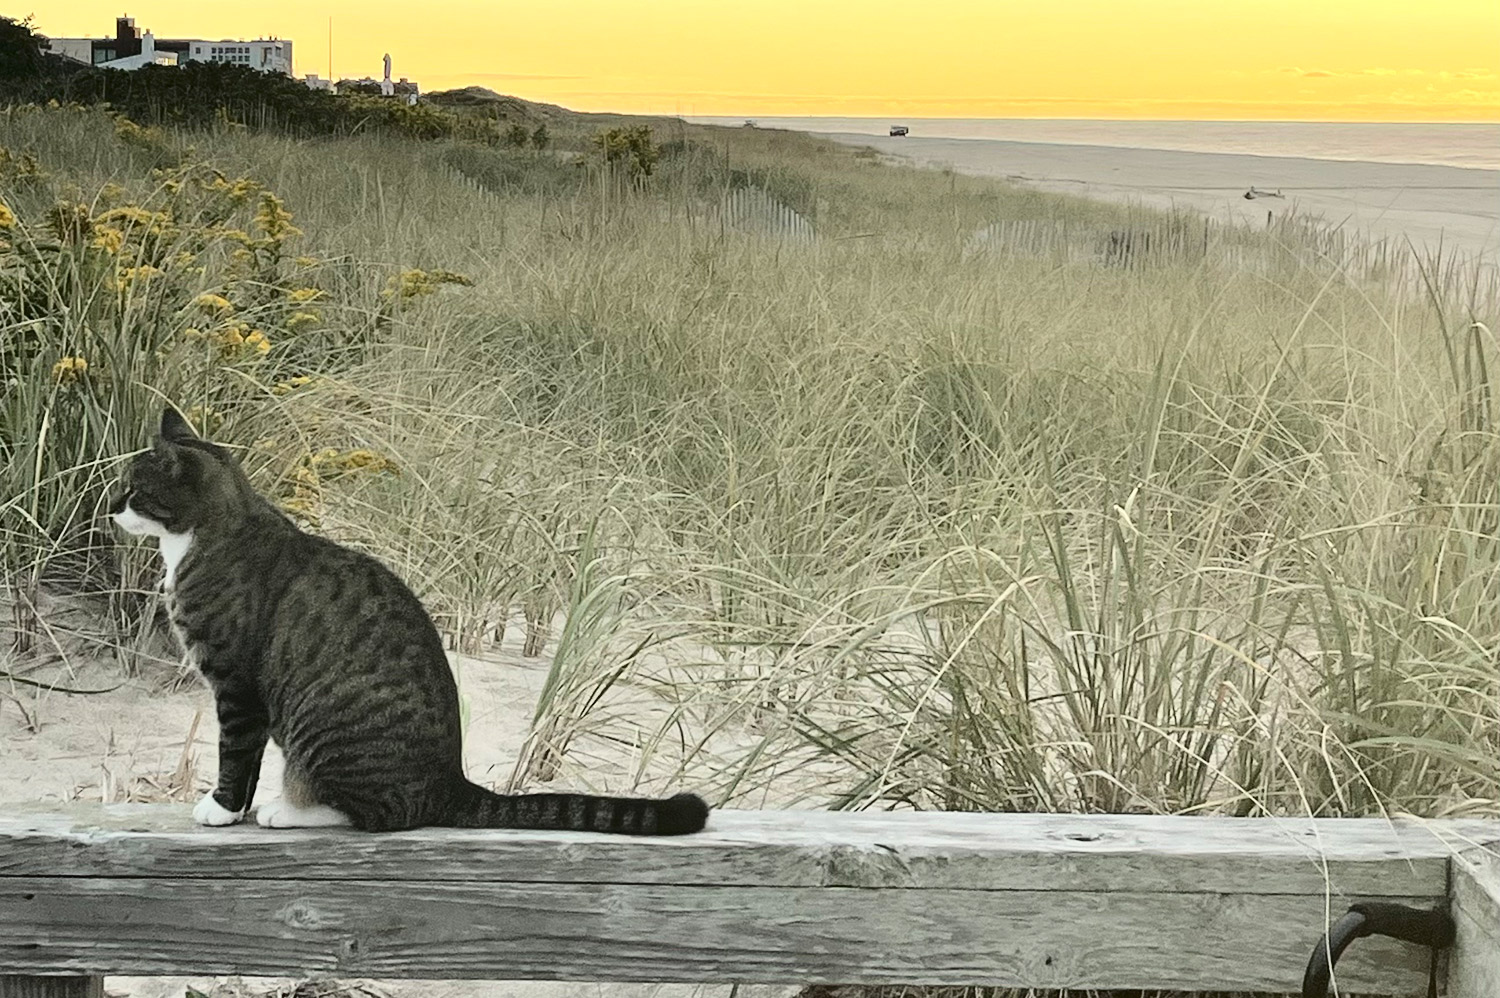 Operation Cat  Animal Rescue Fund of the Hamptons